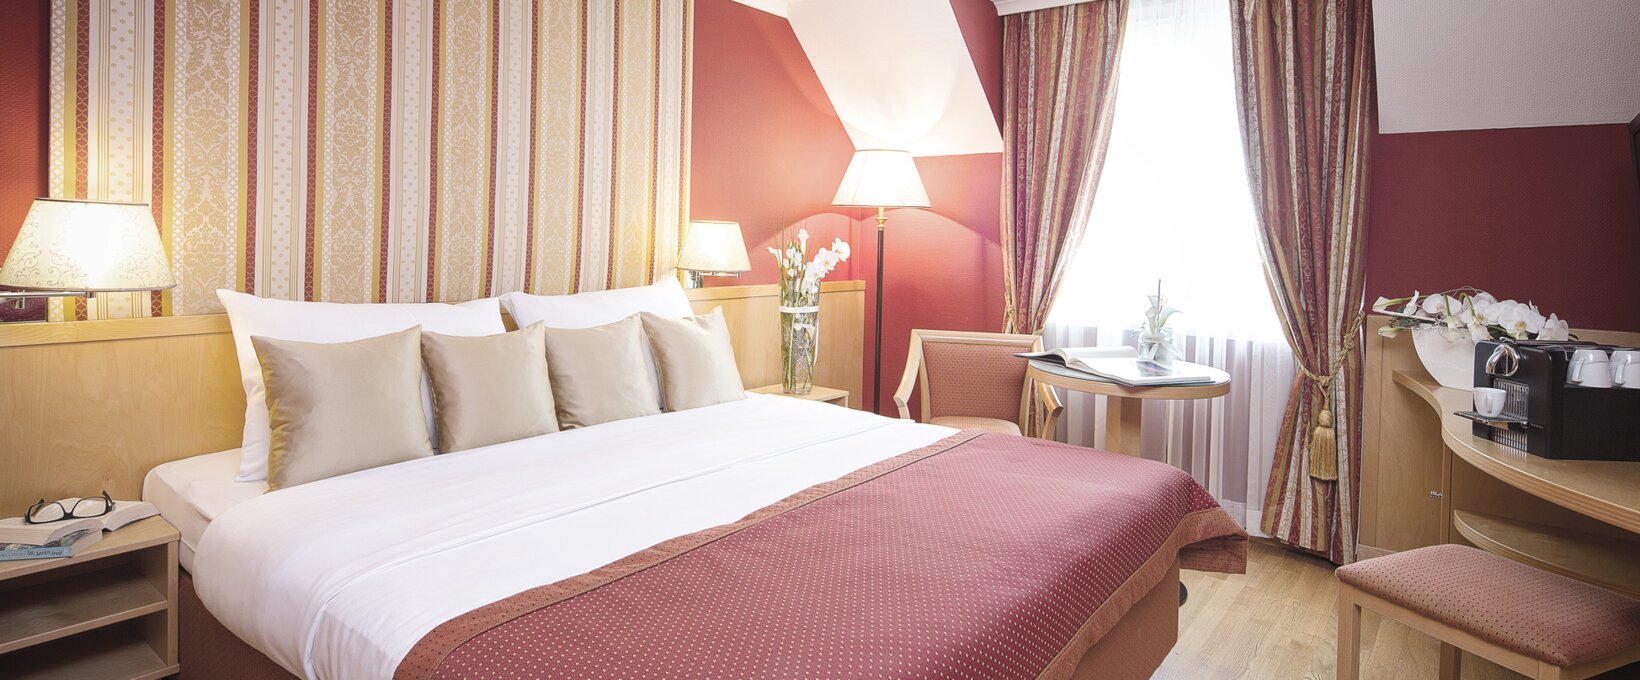 Executive Room with kingsize bed | Hotel Ananas in Vienna